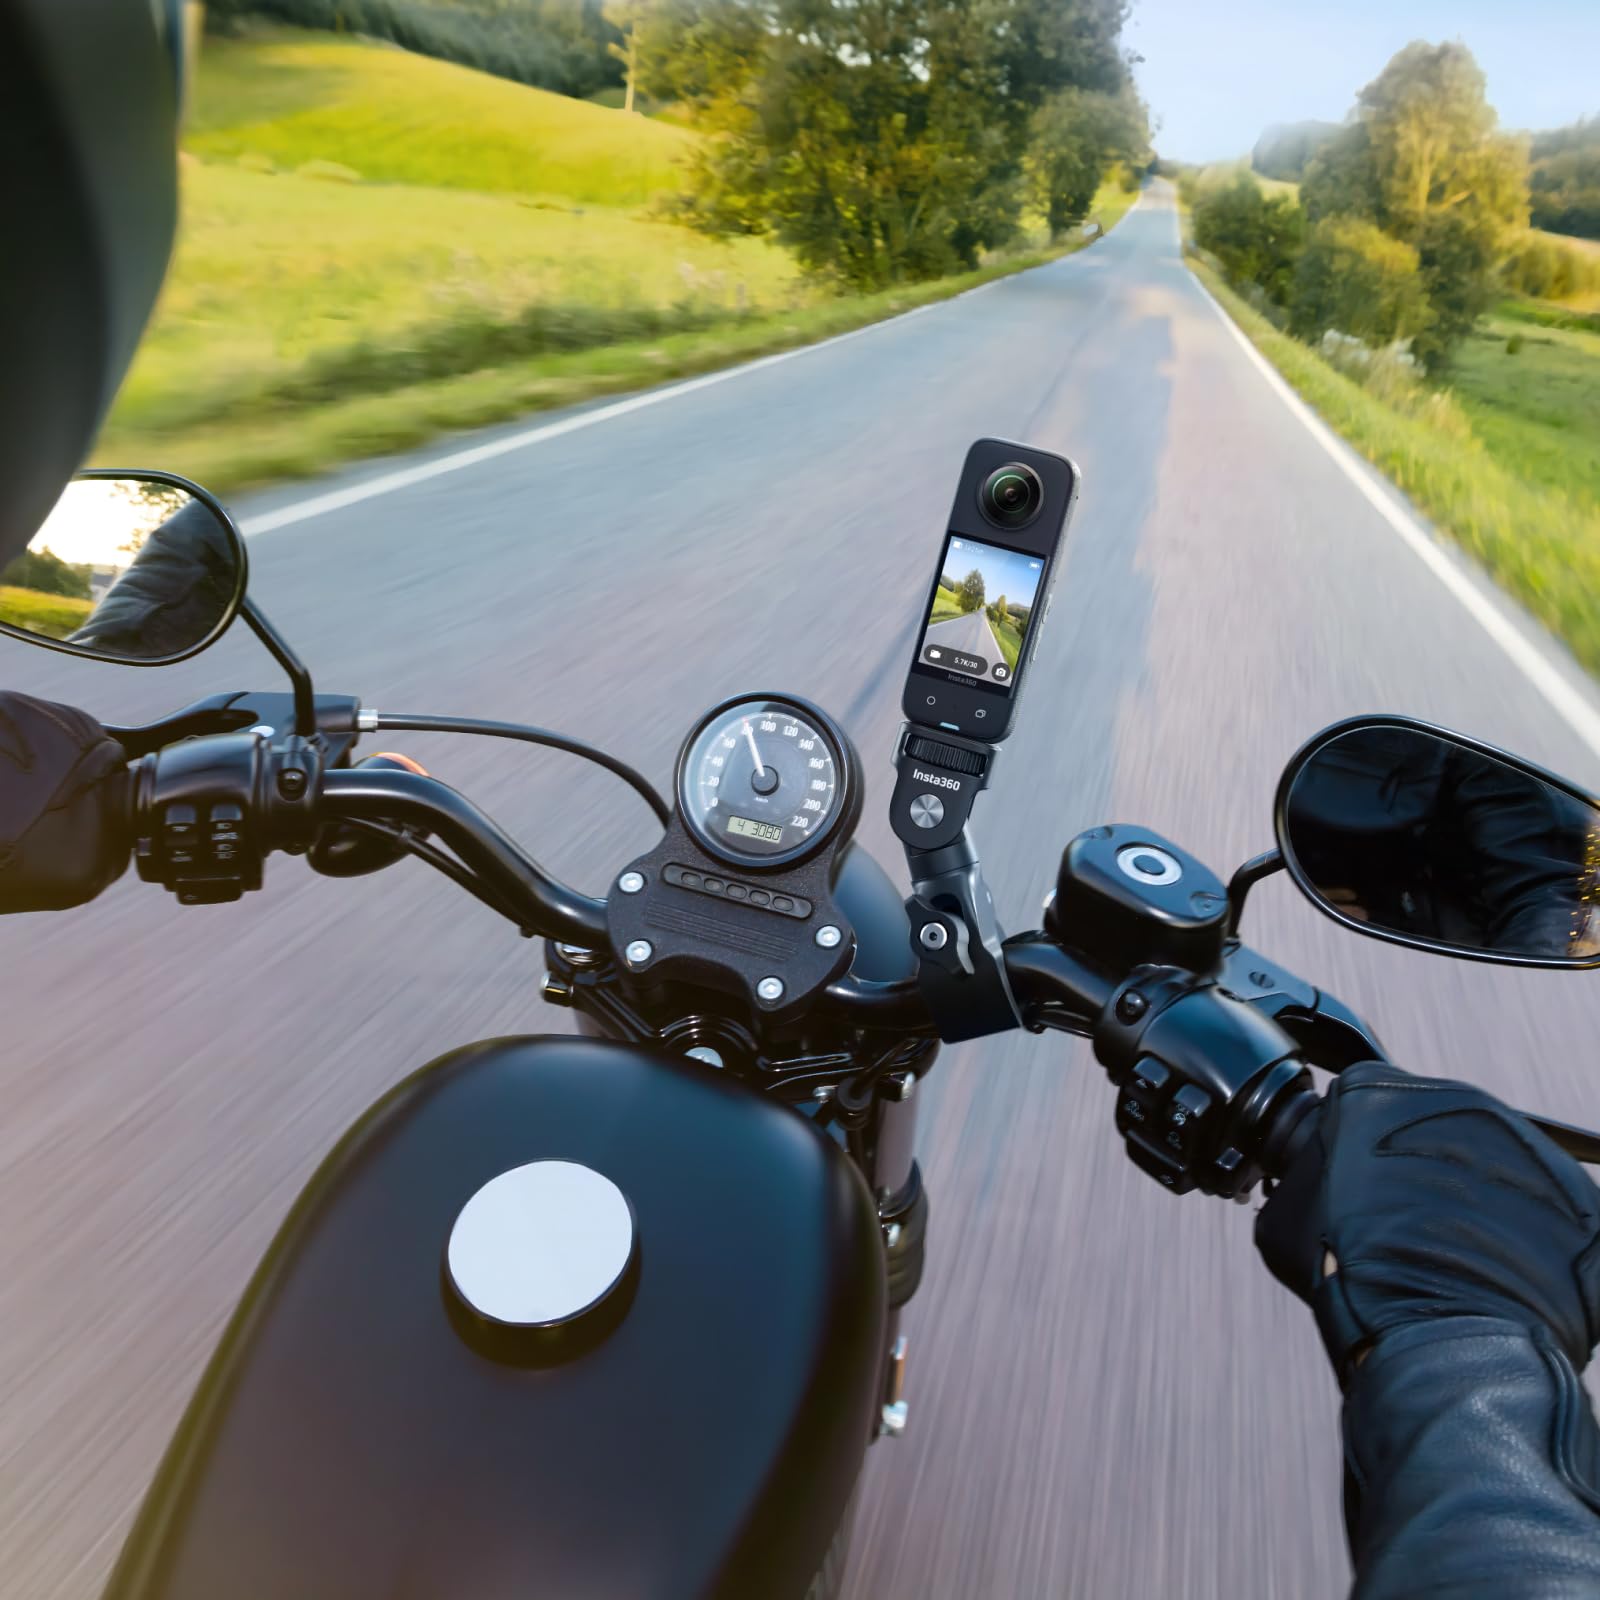 Insta360 Motorcycle Bundle, Universal Powerful Clamp and Flexible Adhesive Mount for Cameras